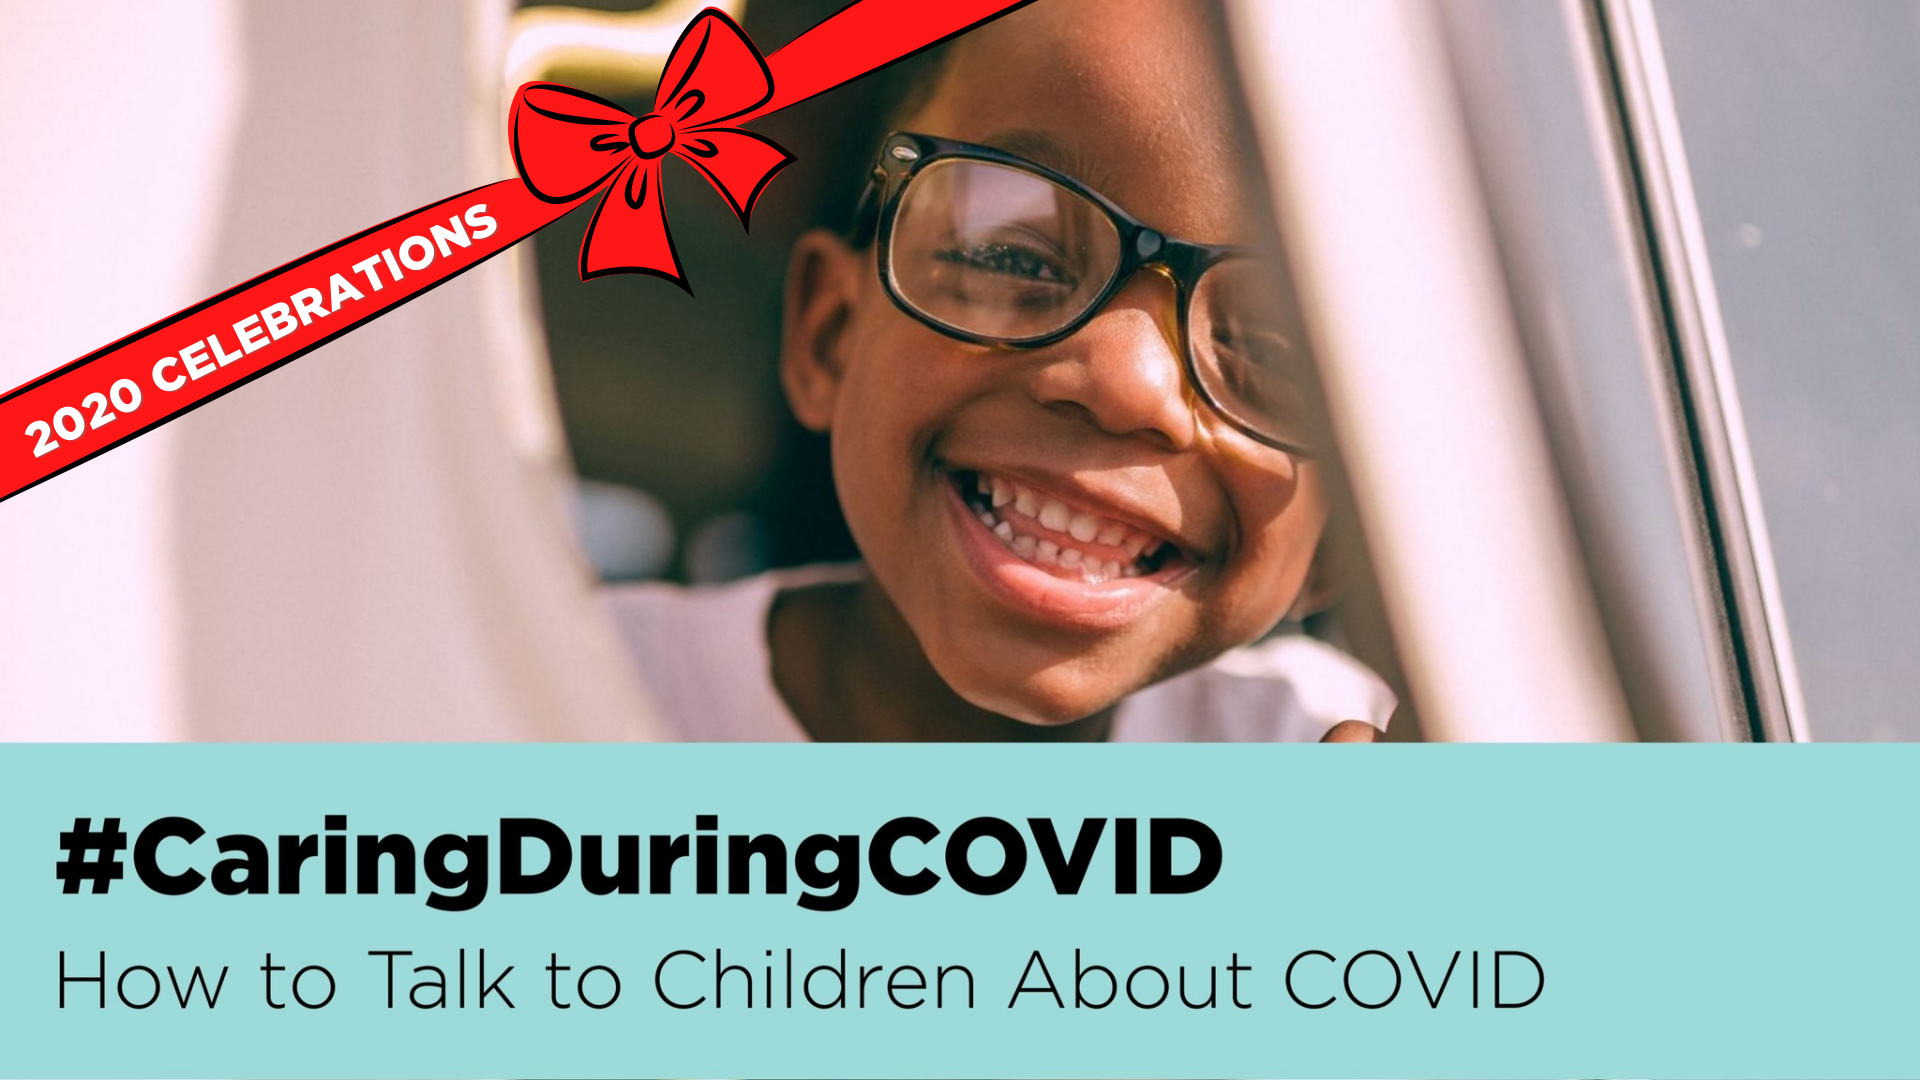 How to talk to children about COVID-19